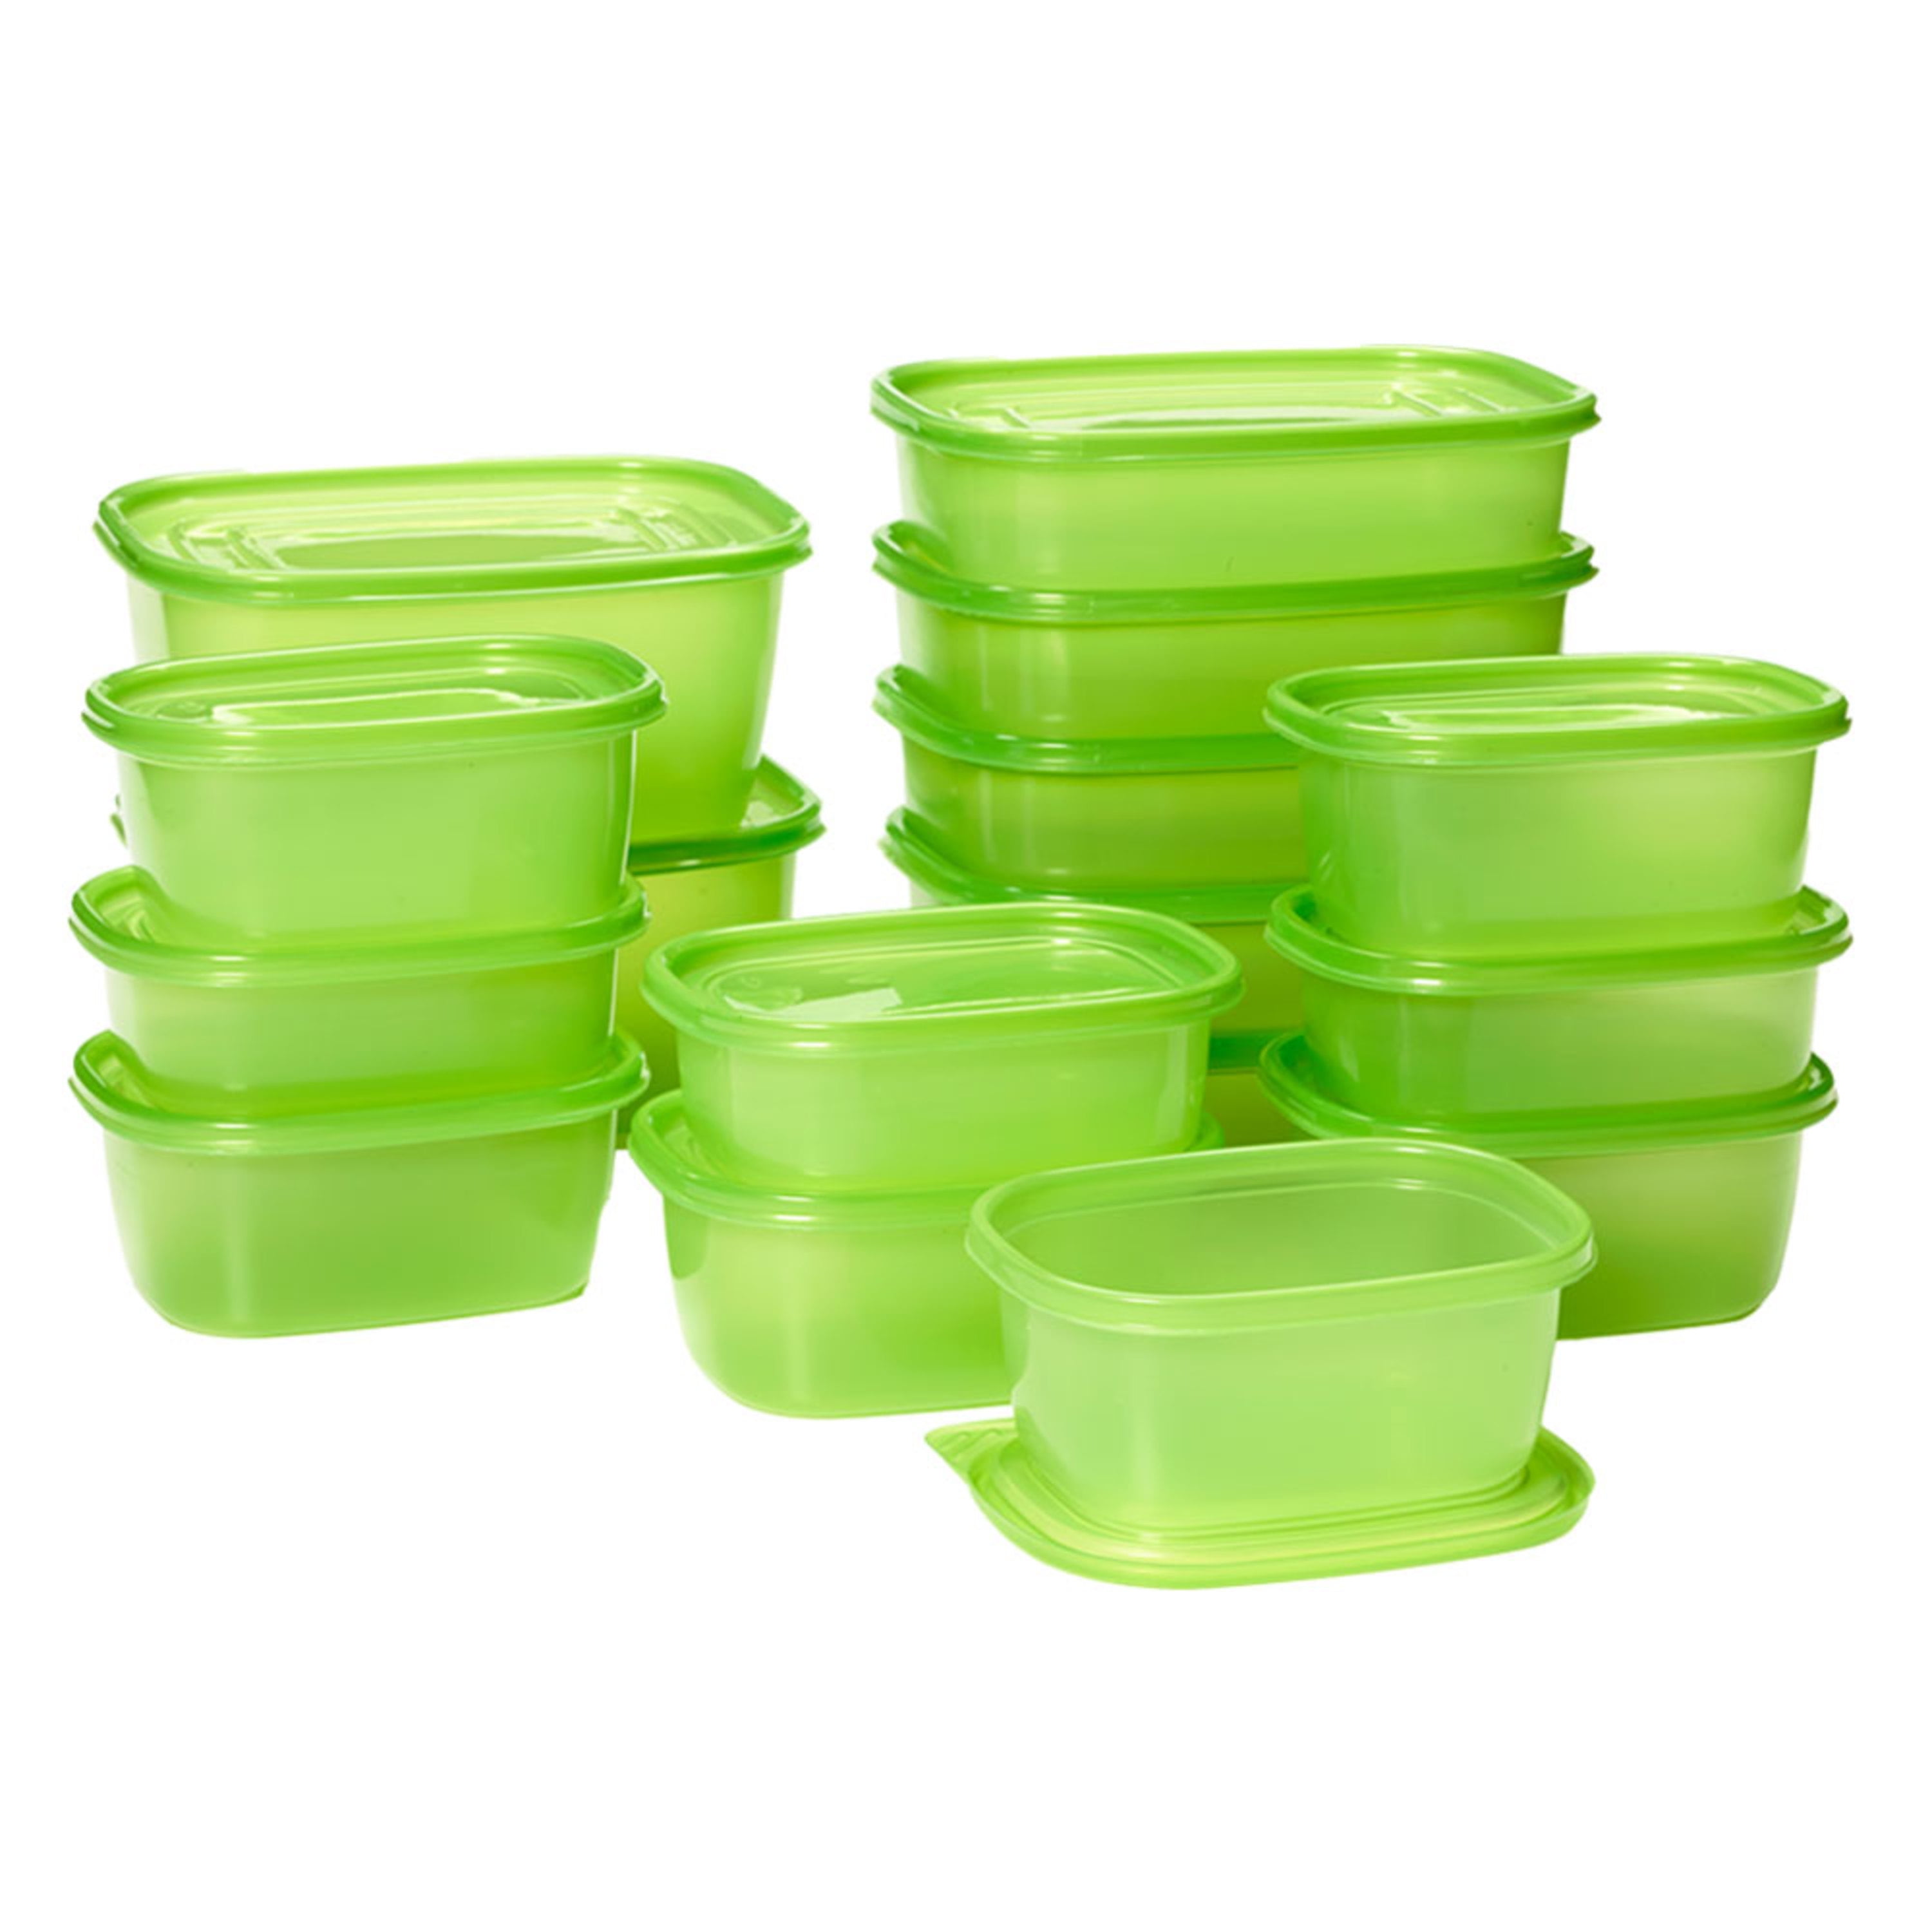 HSN - Which foods do you store in your Debbie Meyer GreenBoxes?